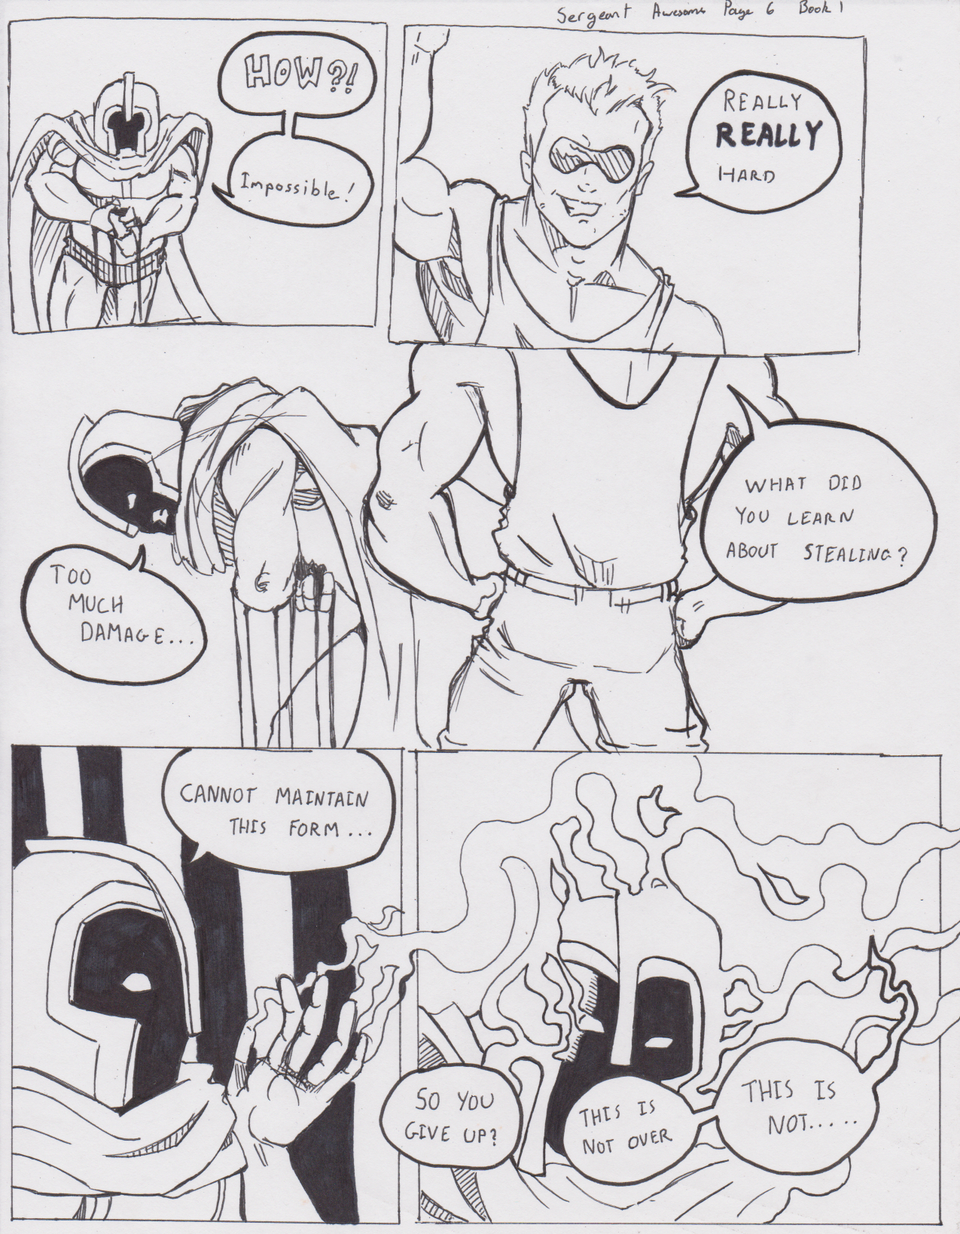 Sergeant Awesome page 6